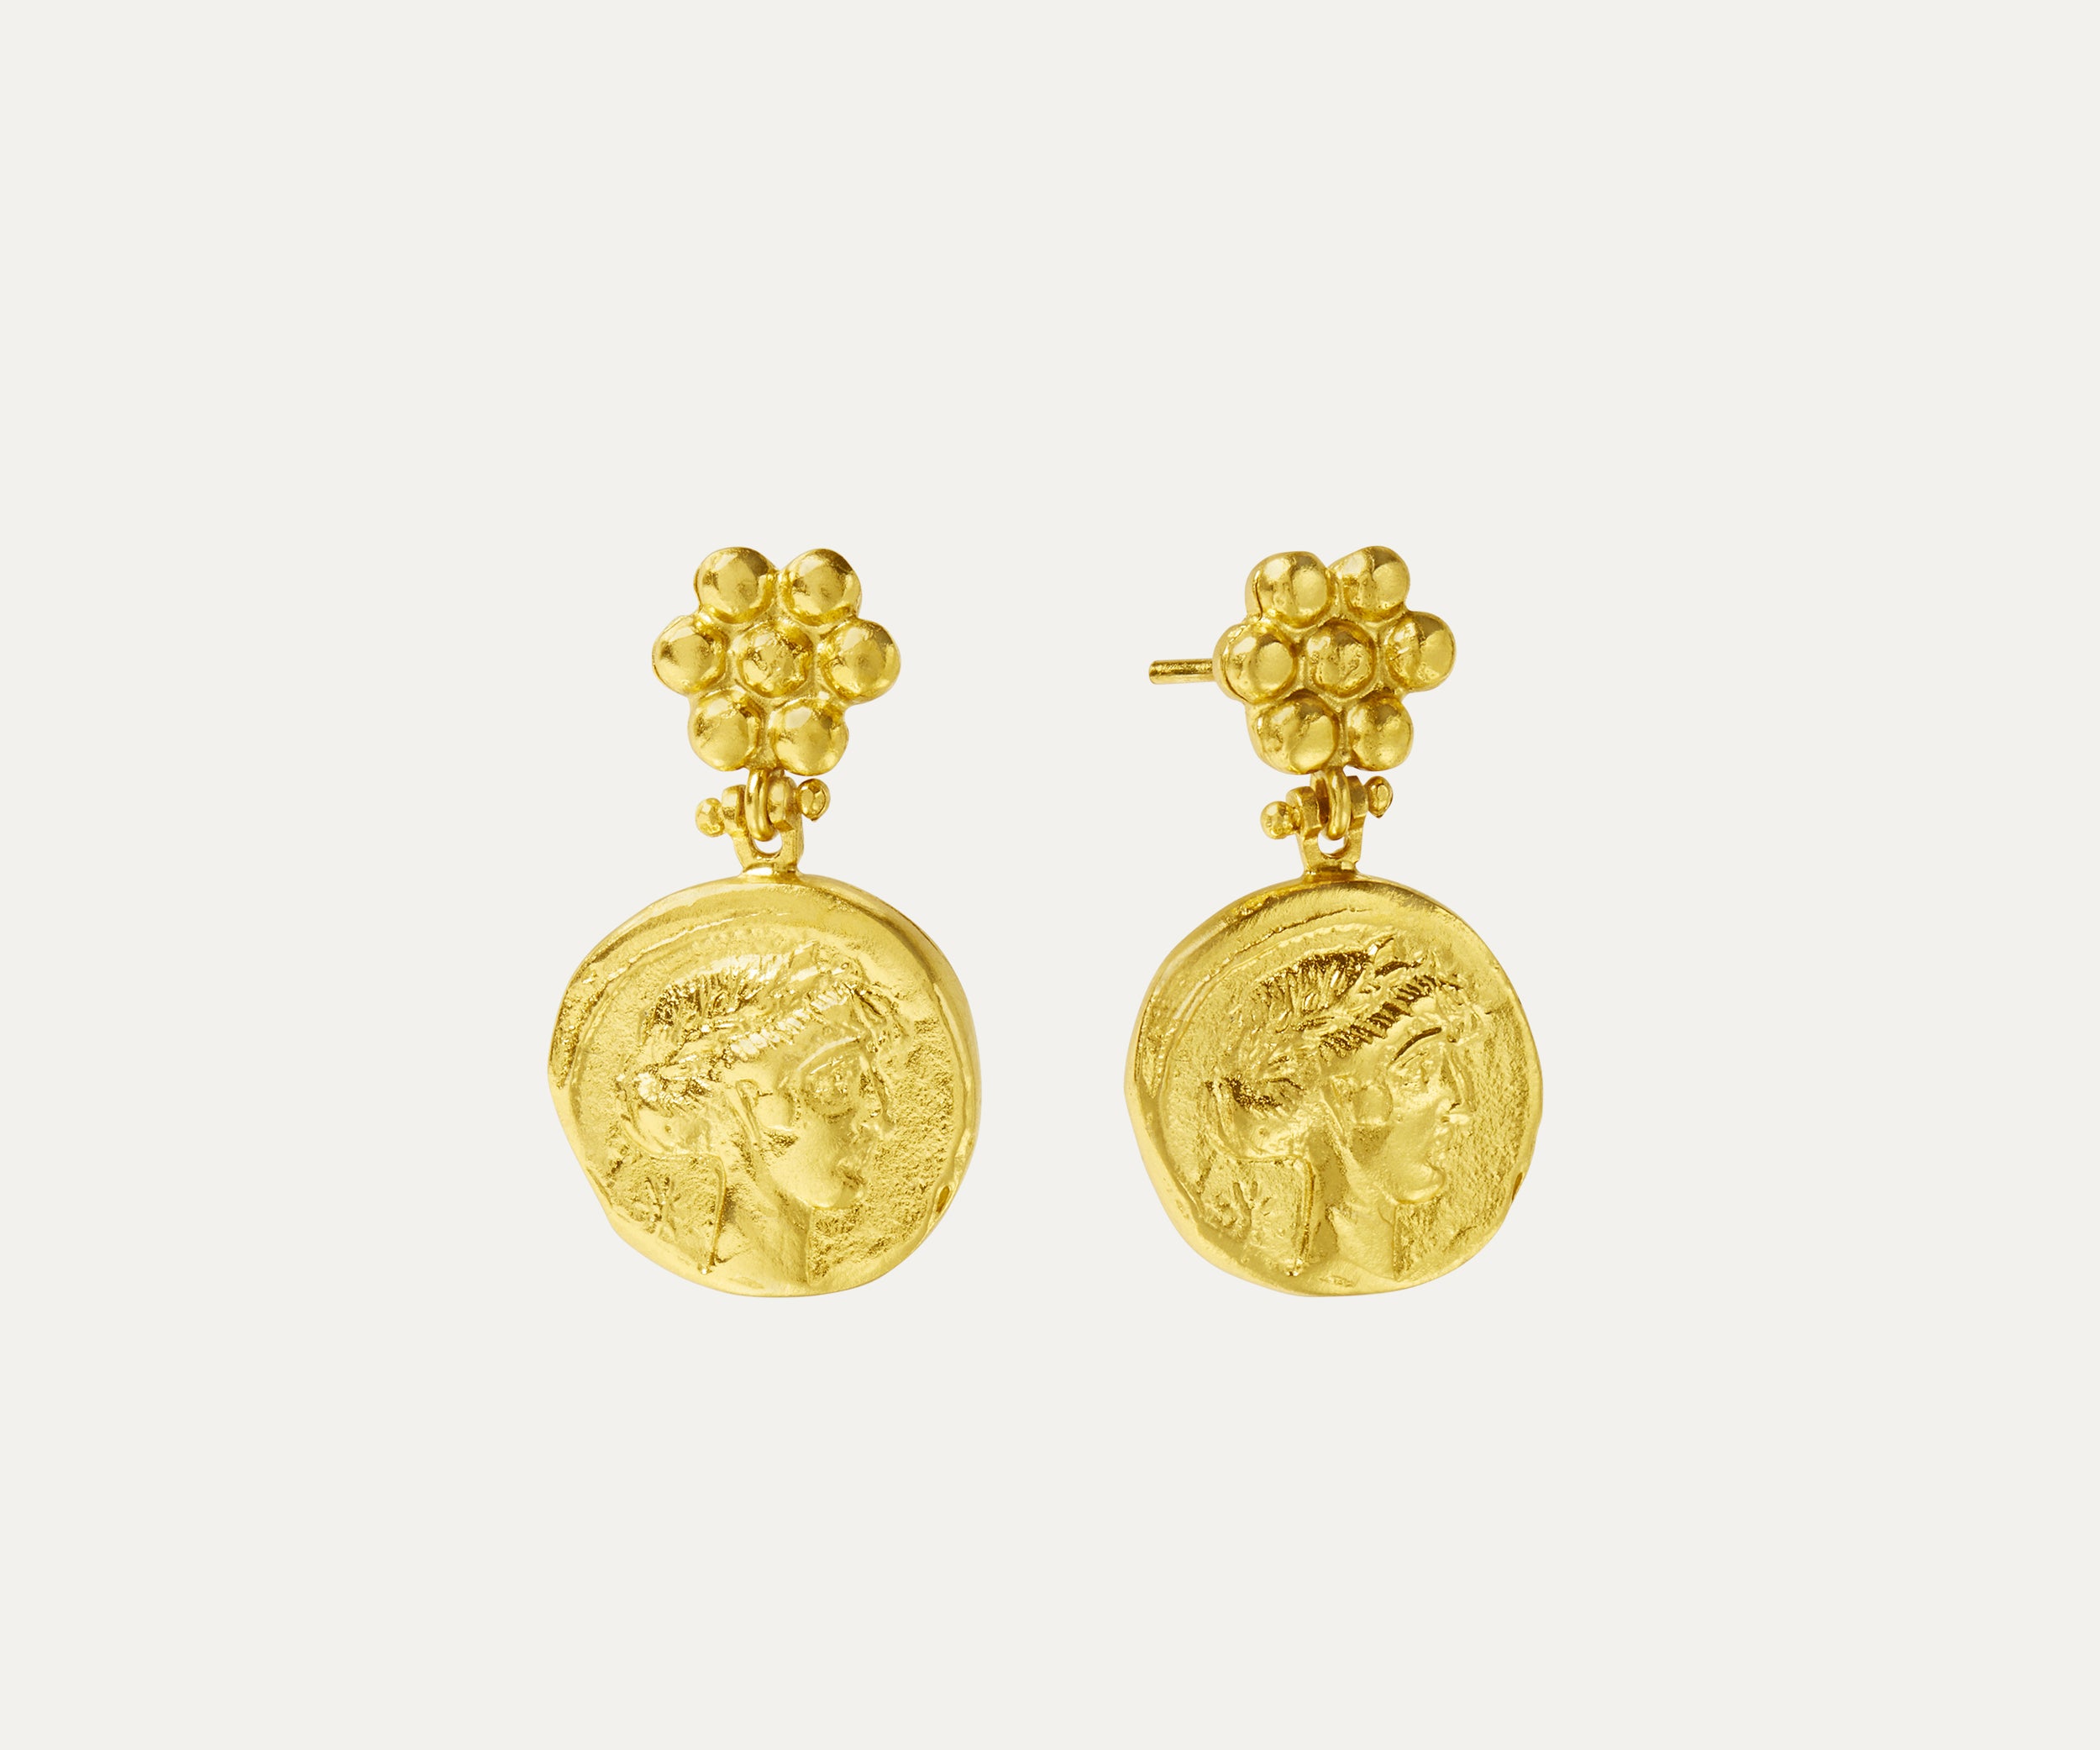 Goddess Demeter Coin Stud Earrings | Sustainable Jewellery by Ottoman Hands